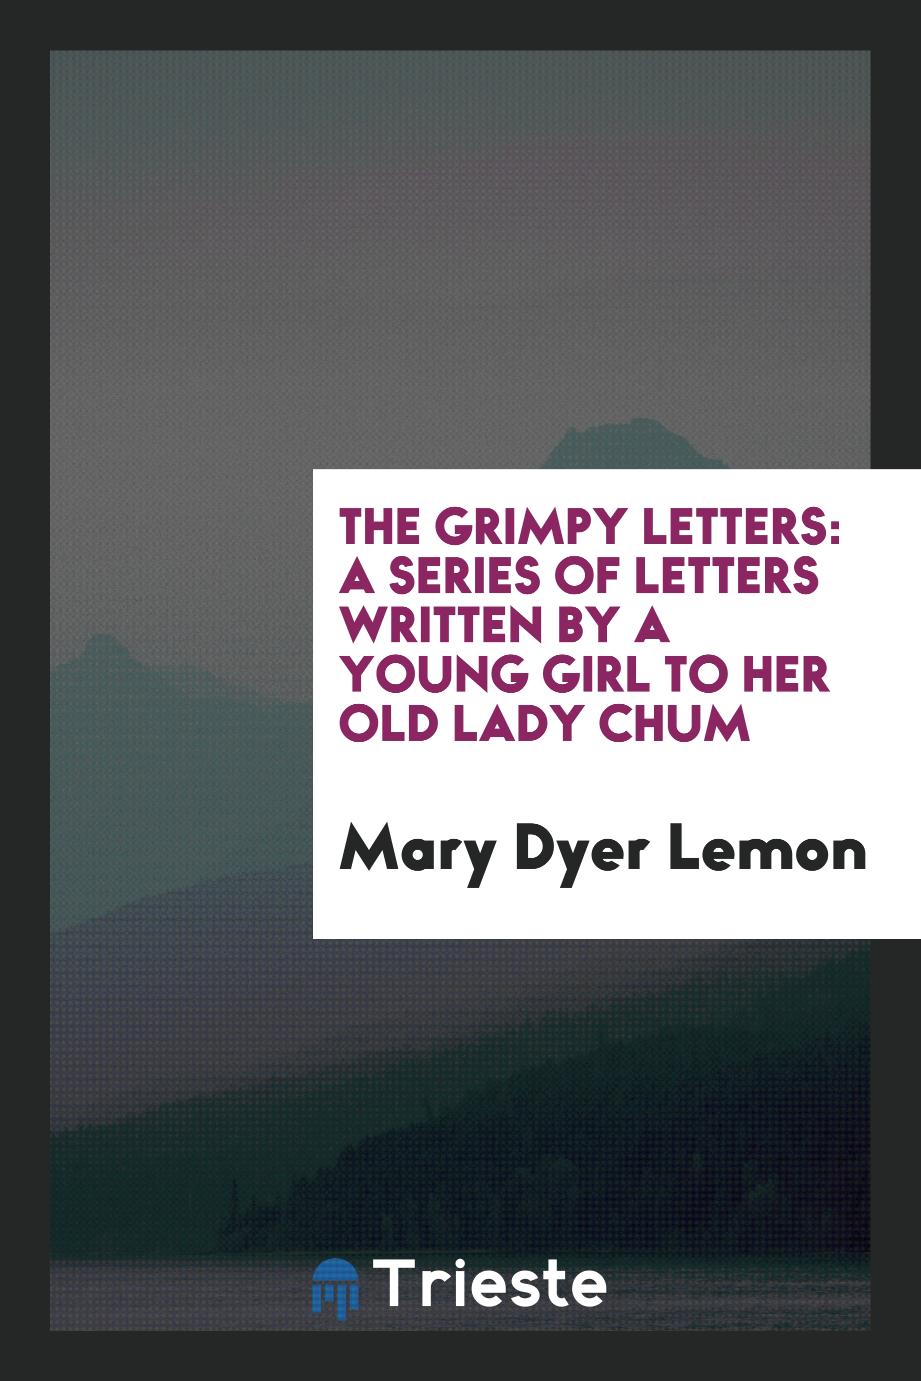 The Grimpy Letters: A Series of Letters Written by a Young Girl to Her Old Lady Chum